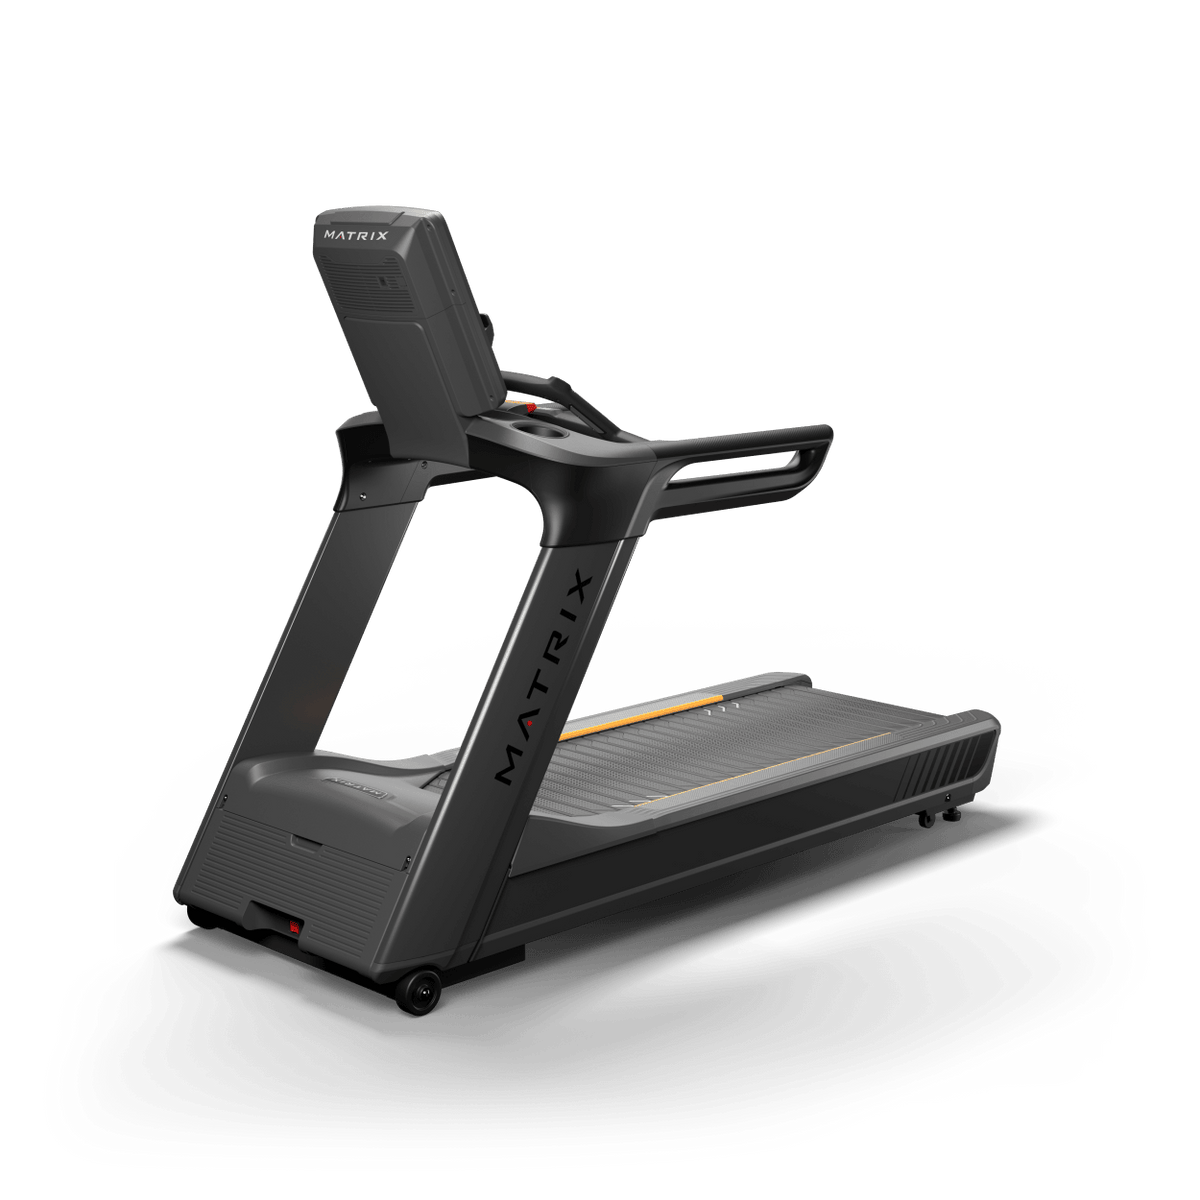 Matrix Performance Plus Treadmill with LED Console rear view | Fitness Experience